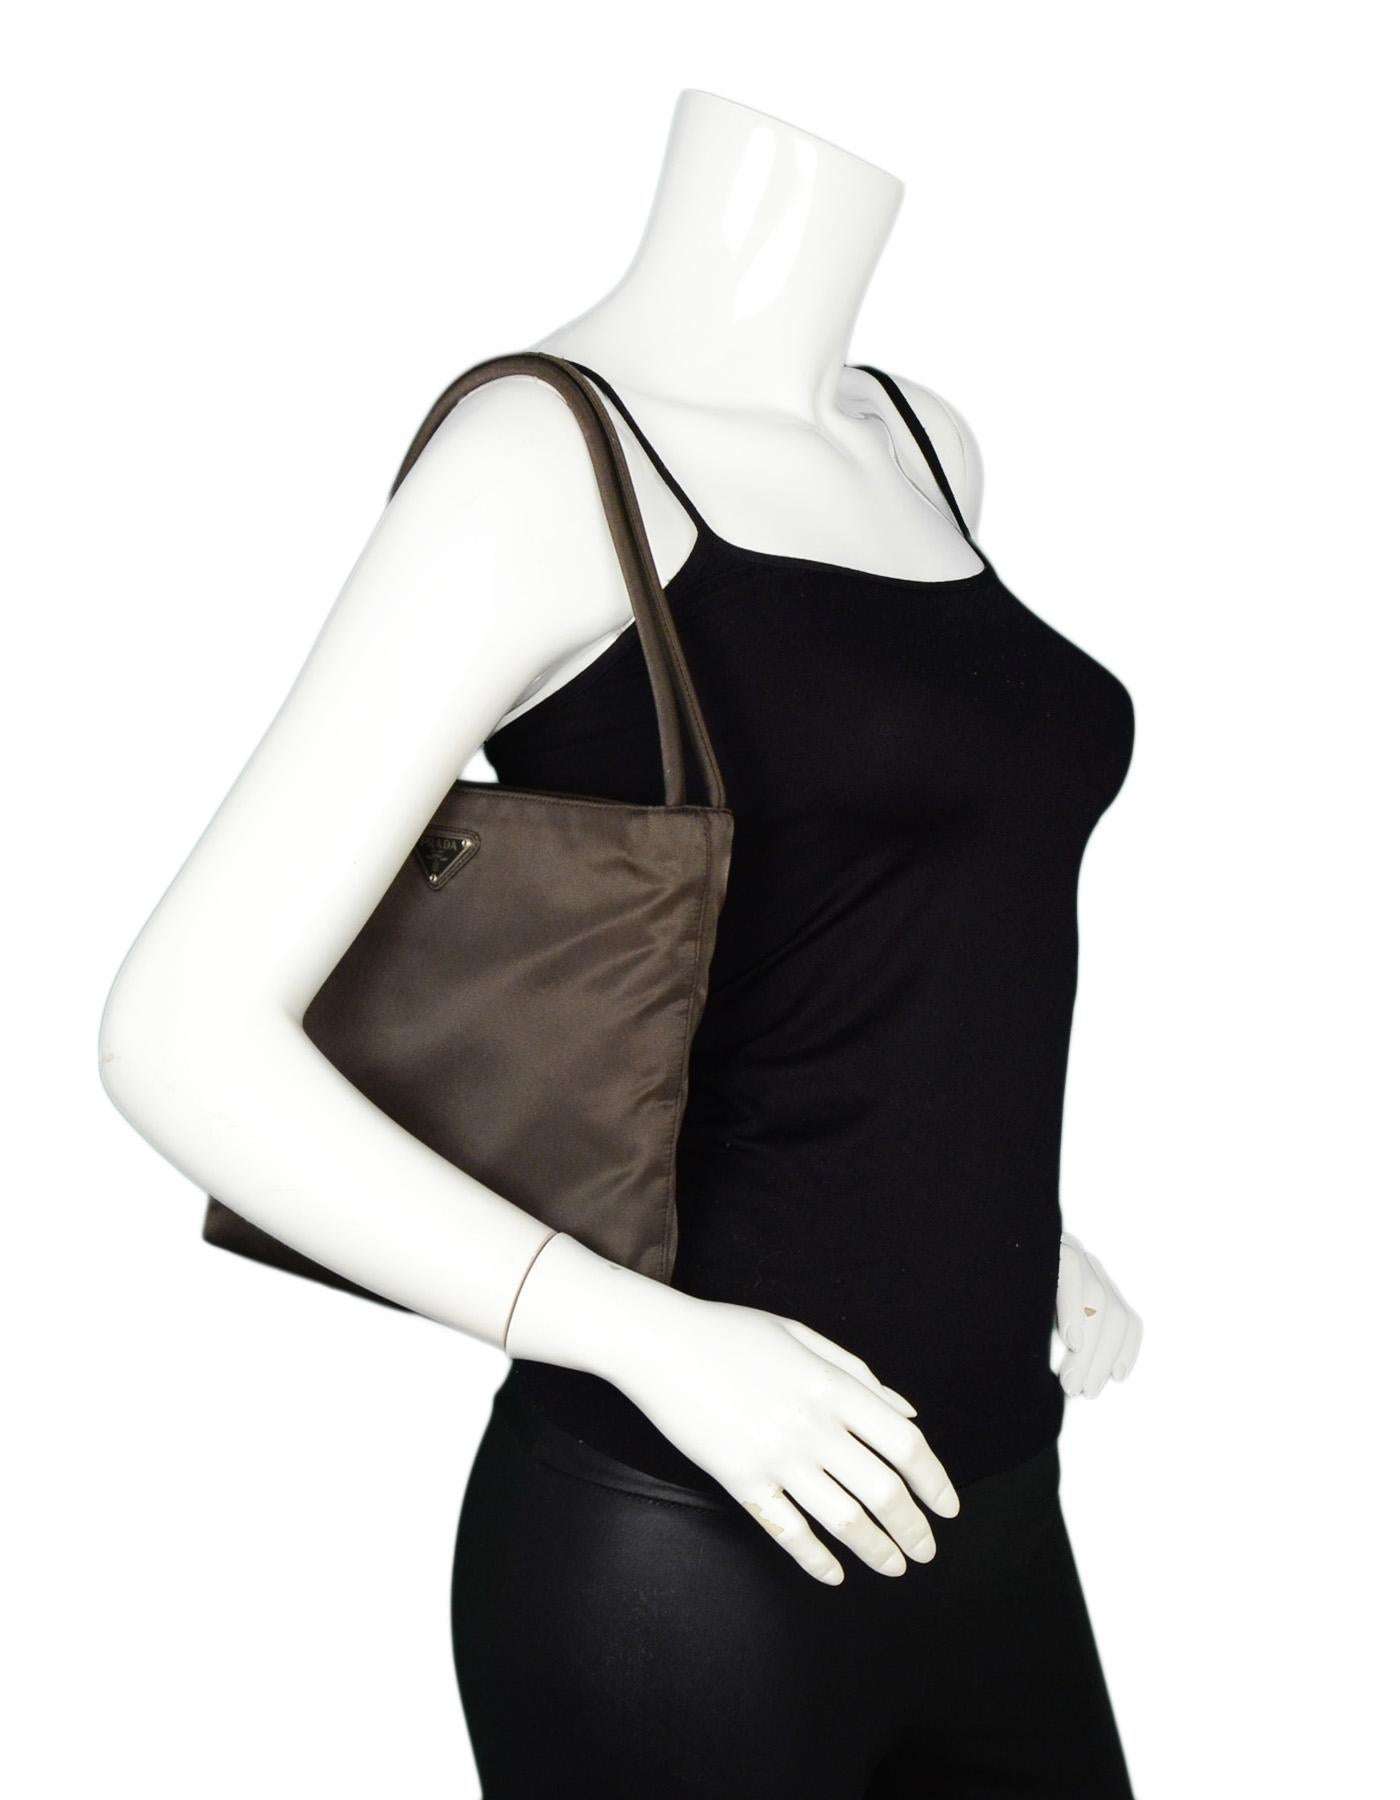 Prada Brown Nylon Double Strap Shoulder Bag

Made In: Italy
Color: Brown
Hardware: Silvertone hardware
Materials: Nylon
Lining: Brown monogram textile
Closure/Opening: Open top
Exterior Pockets: N/A
Interior Pockets: Two compartments, two slit